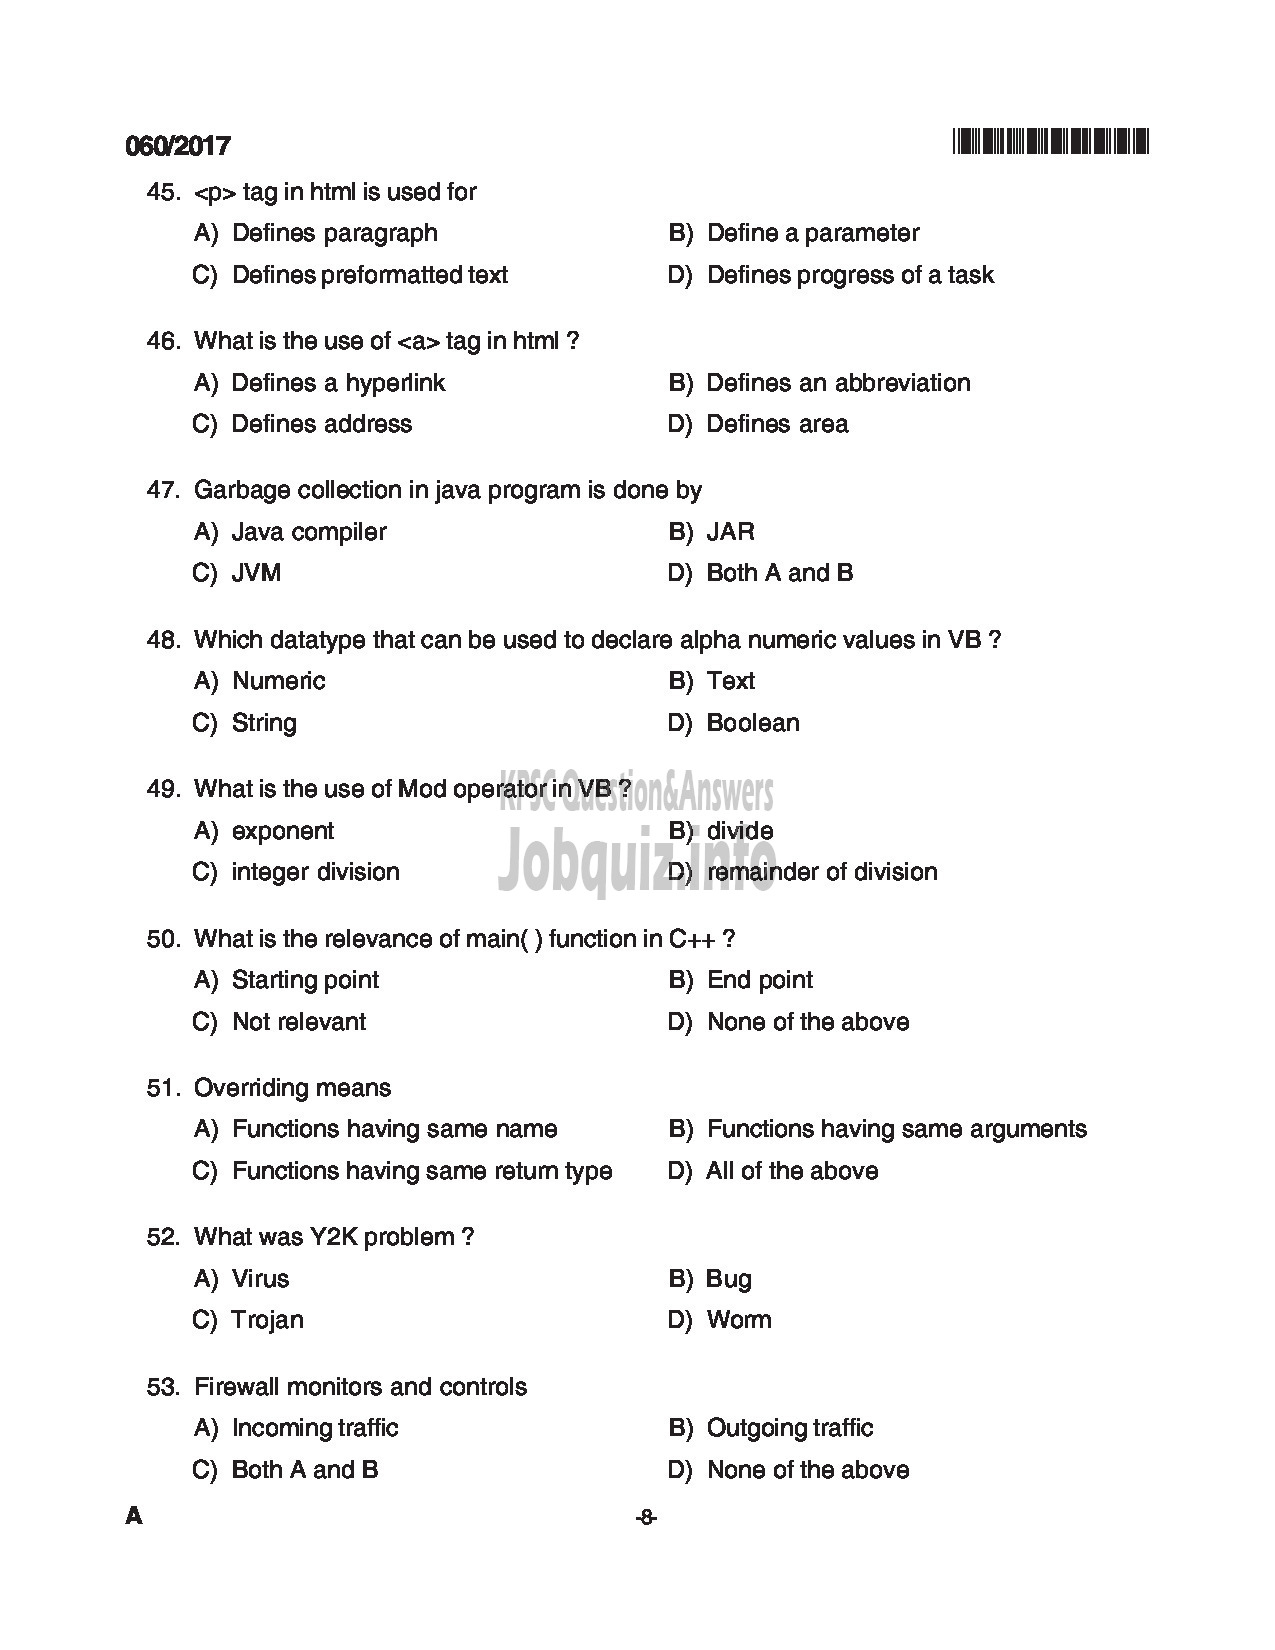 Kerala PSC Question Paper - TRADESMAN COMPUTER ENGINEERING TECHNICAL EDUCATION QUESTION PAPER-8